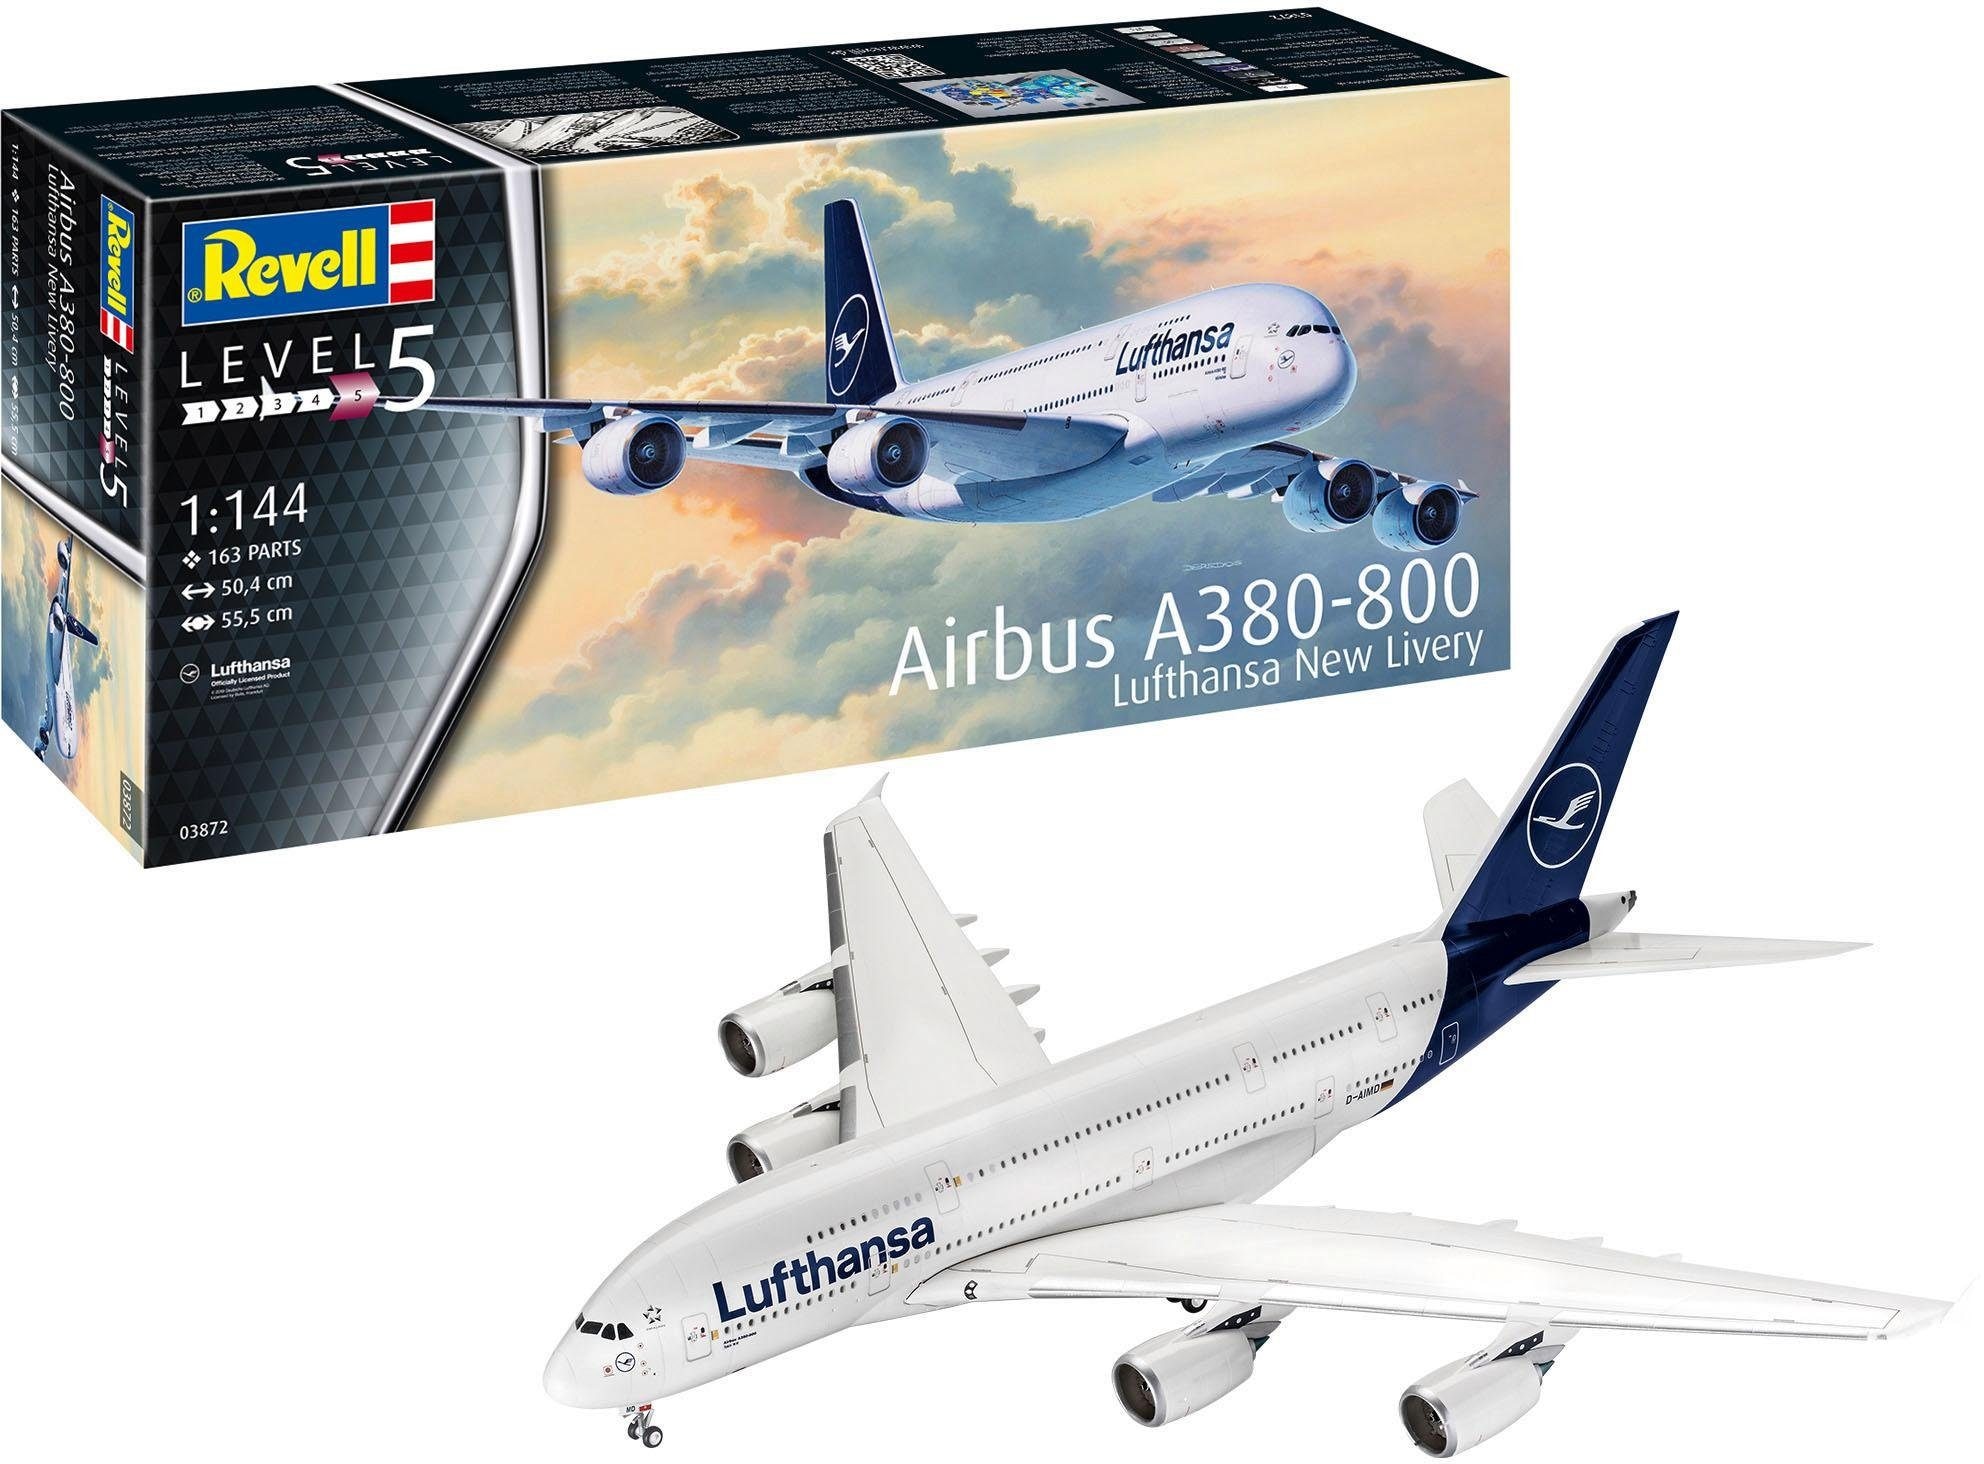 Modellbausatz »Airbus A380-800 Lufthansa - New Livery«, 1:144, Made in Europe